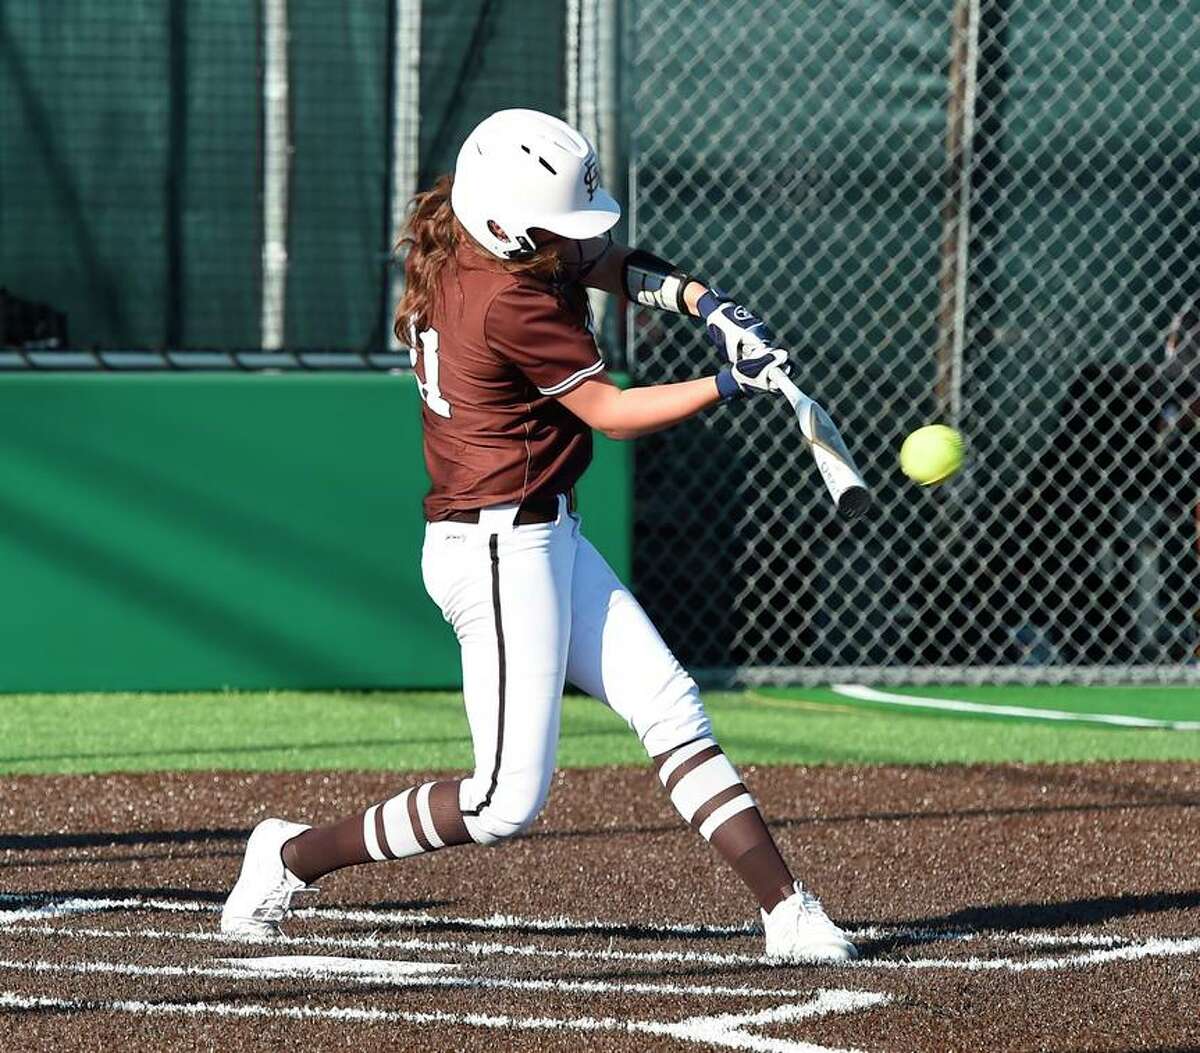 Jessica Oakland, The Chronicle's 2021 Softball Player of the Year, has four HRs and nine RBI in three games.